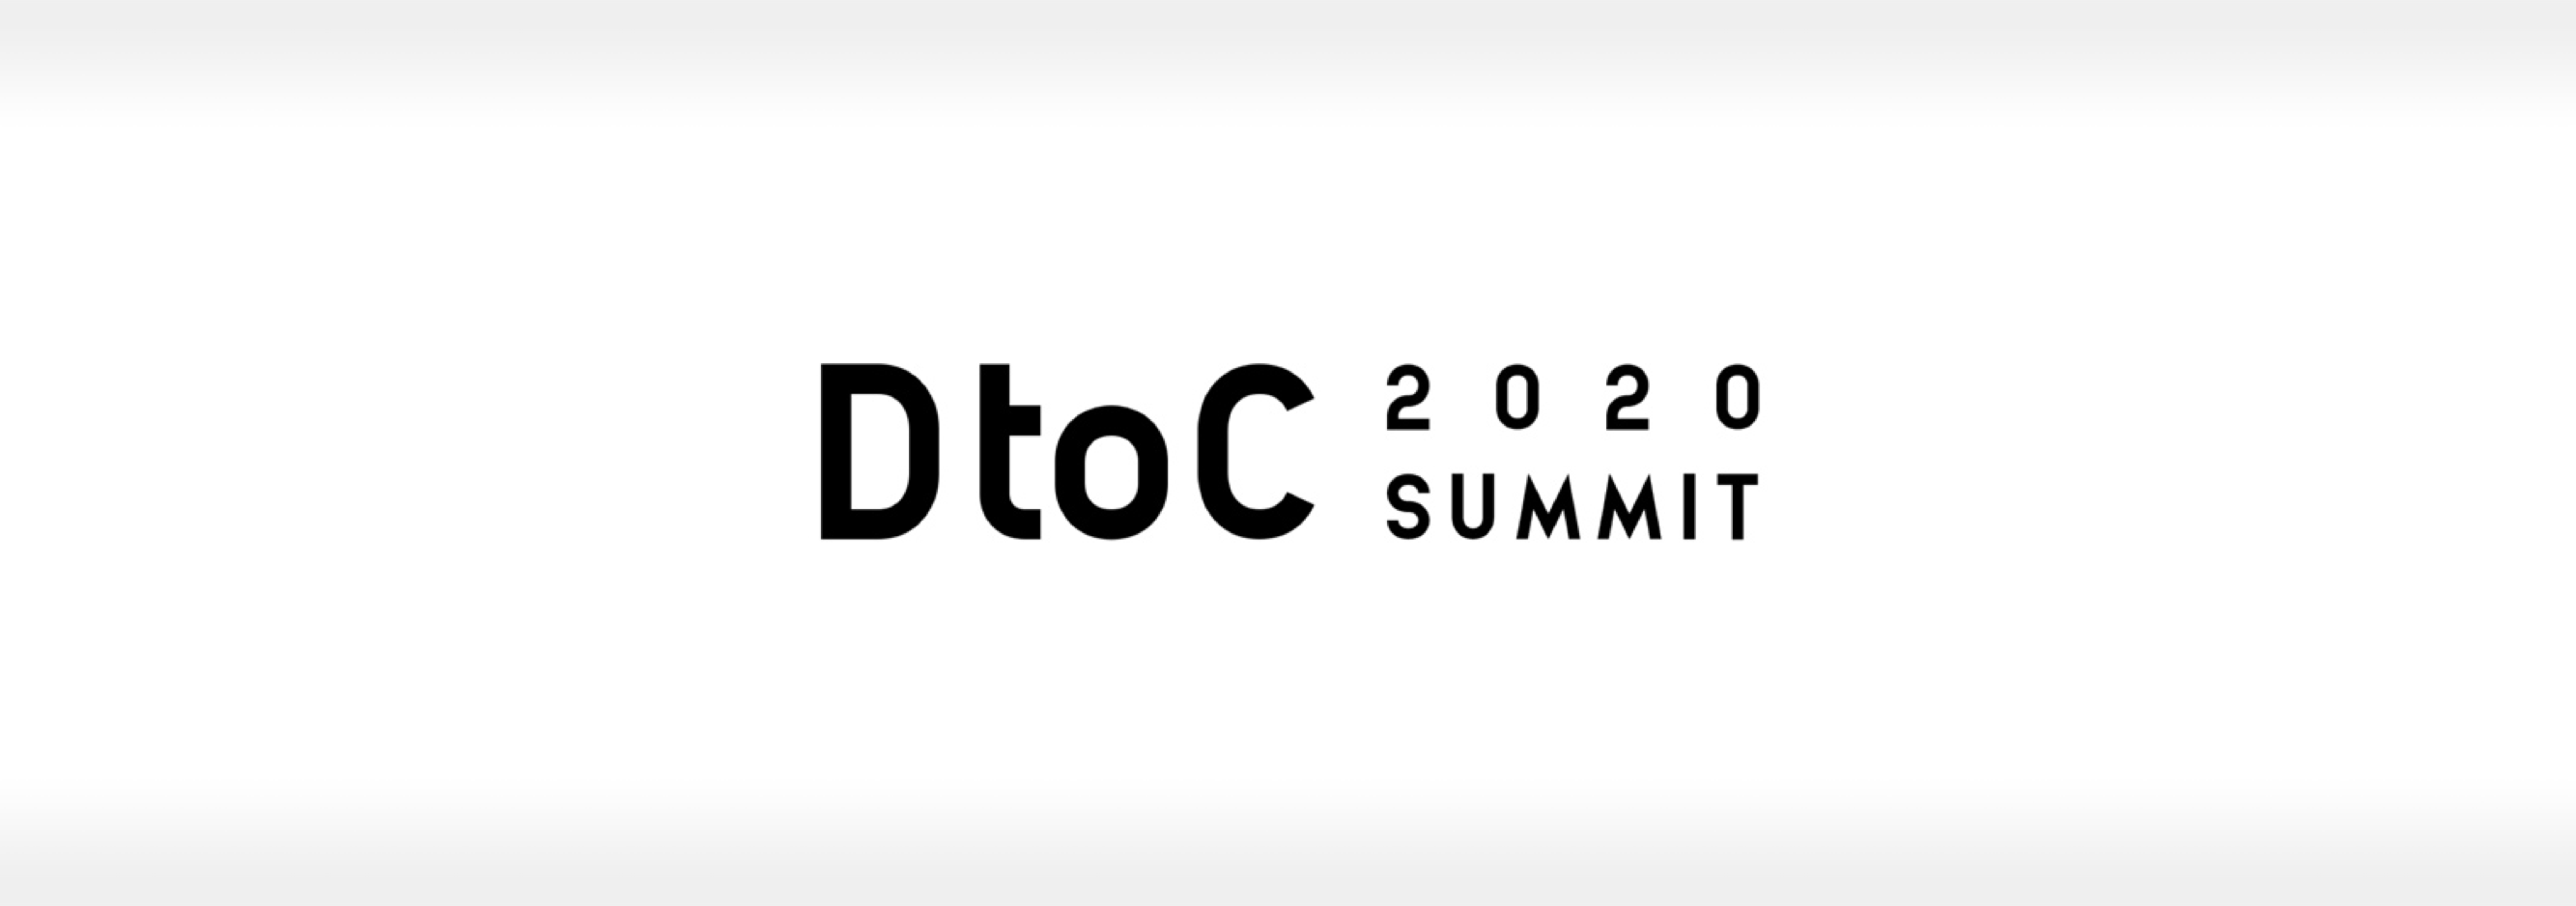 「DtoC Summit 2020」に福岡市の後援決定 -「通販王国 九州」から「DtoC王国 九州」へ、スピーカーやセッションも続々発表